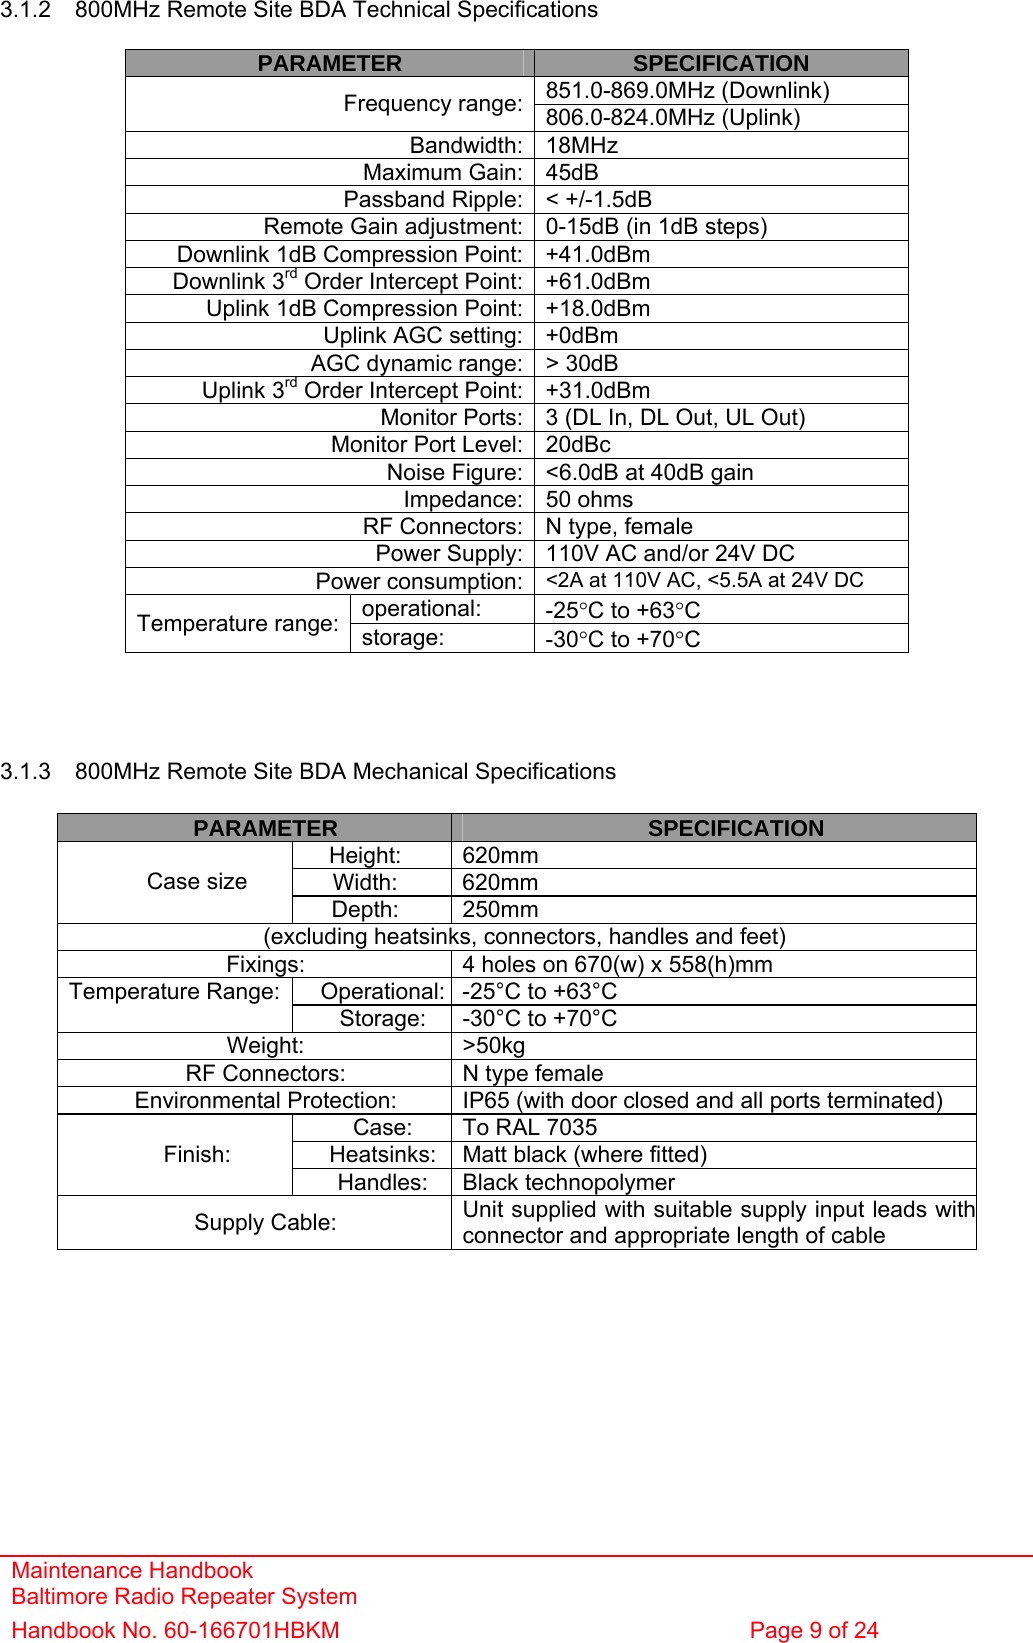 Maintenance Handbook Baltimore Radio Repeater System Handbook No. 60-166701HBKM  Page 9 of 24   3.1.2  800MHz Remote Site BDA Technical Specifications  PARAMETER  SPECIFICATION 851.0-869.0MHz (Downlink) Frequency range: 806.0-824.0MHz (Uplink) Bandwidth: 18MHz Maximum Gain: 45dB Passband Ripple: &lt; +/-1.5dB Remote Gain adjustment: 0-15dB (in 1dB steps) Downlink 1dB Compression Point: +41.0dBm Downlink 3rd Order Intercept Point: +61.0dBm Uplink 1dB Compression Point: +18.0dBm Uplink AGC setting: +0dBm AGC dynamic range: &gt; 30dB Uplink 3rd Order Intercept Point: +31.0dBm Monitor Ports: 3 (DL In, DL Out, UL Out) Monitor Port Level: 20dBc Noise Figure: &lt;6.0dB at 40dB gain Impedance: 50 ohms RF Connectors: N type, female Power Supply: 110V AC and/or 24V DC Power consumption: &lt;2A at 110V AC, &lt;5.5A at 24V DC operational:  -25°C to +63°C Temperature range:  storage:  -30°C to +70°C     3.1.3  800MHz Remote Site BDA Mechanical Specifications  PARAMETER  SPECIFICATION Height: 620mm Width: 620mm Case size Depth: 250mm (excluding heatsinks, connectors, handles and feet) Fixings:  4 holes on 670(w) x 558(h)mm Operational: -25°C to +63°C Temperature Range: Storage:  -30°C to +70°C Weight: &gt;50kg RF Connectors:  N type female Environmental Protection:  IP65 (with door closed and all ports terminated) Case:  To RAL 7035 Heatsinks:  Matt black (where fitted) Finish: Handles: Black technopolymer Supply Cable:  Unit supplied with suitable supply input leads withconnector and appropriate length of cable 